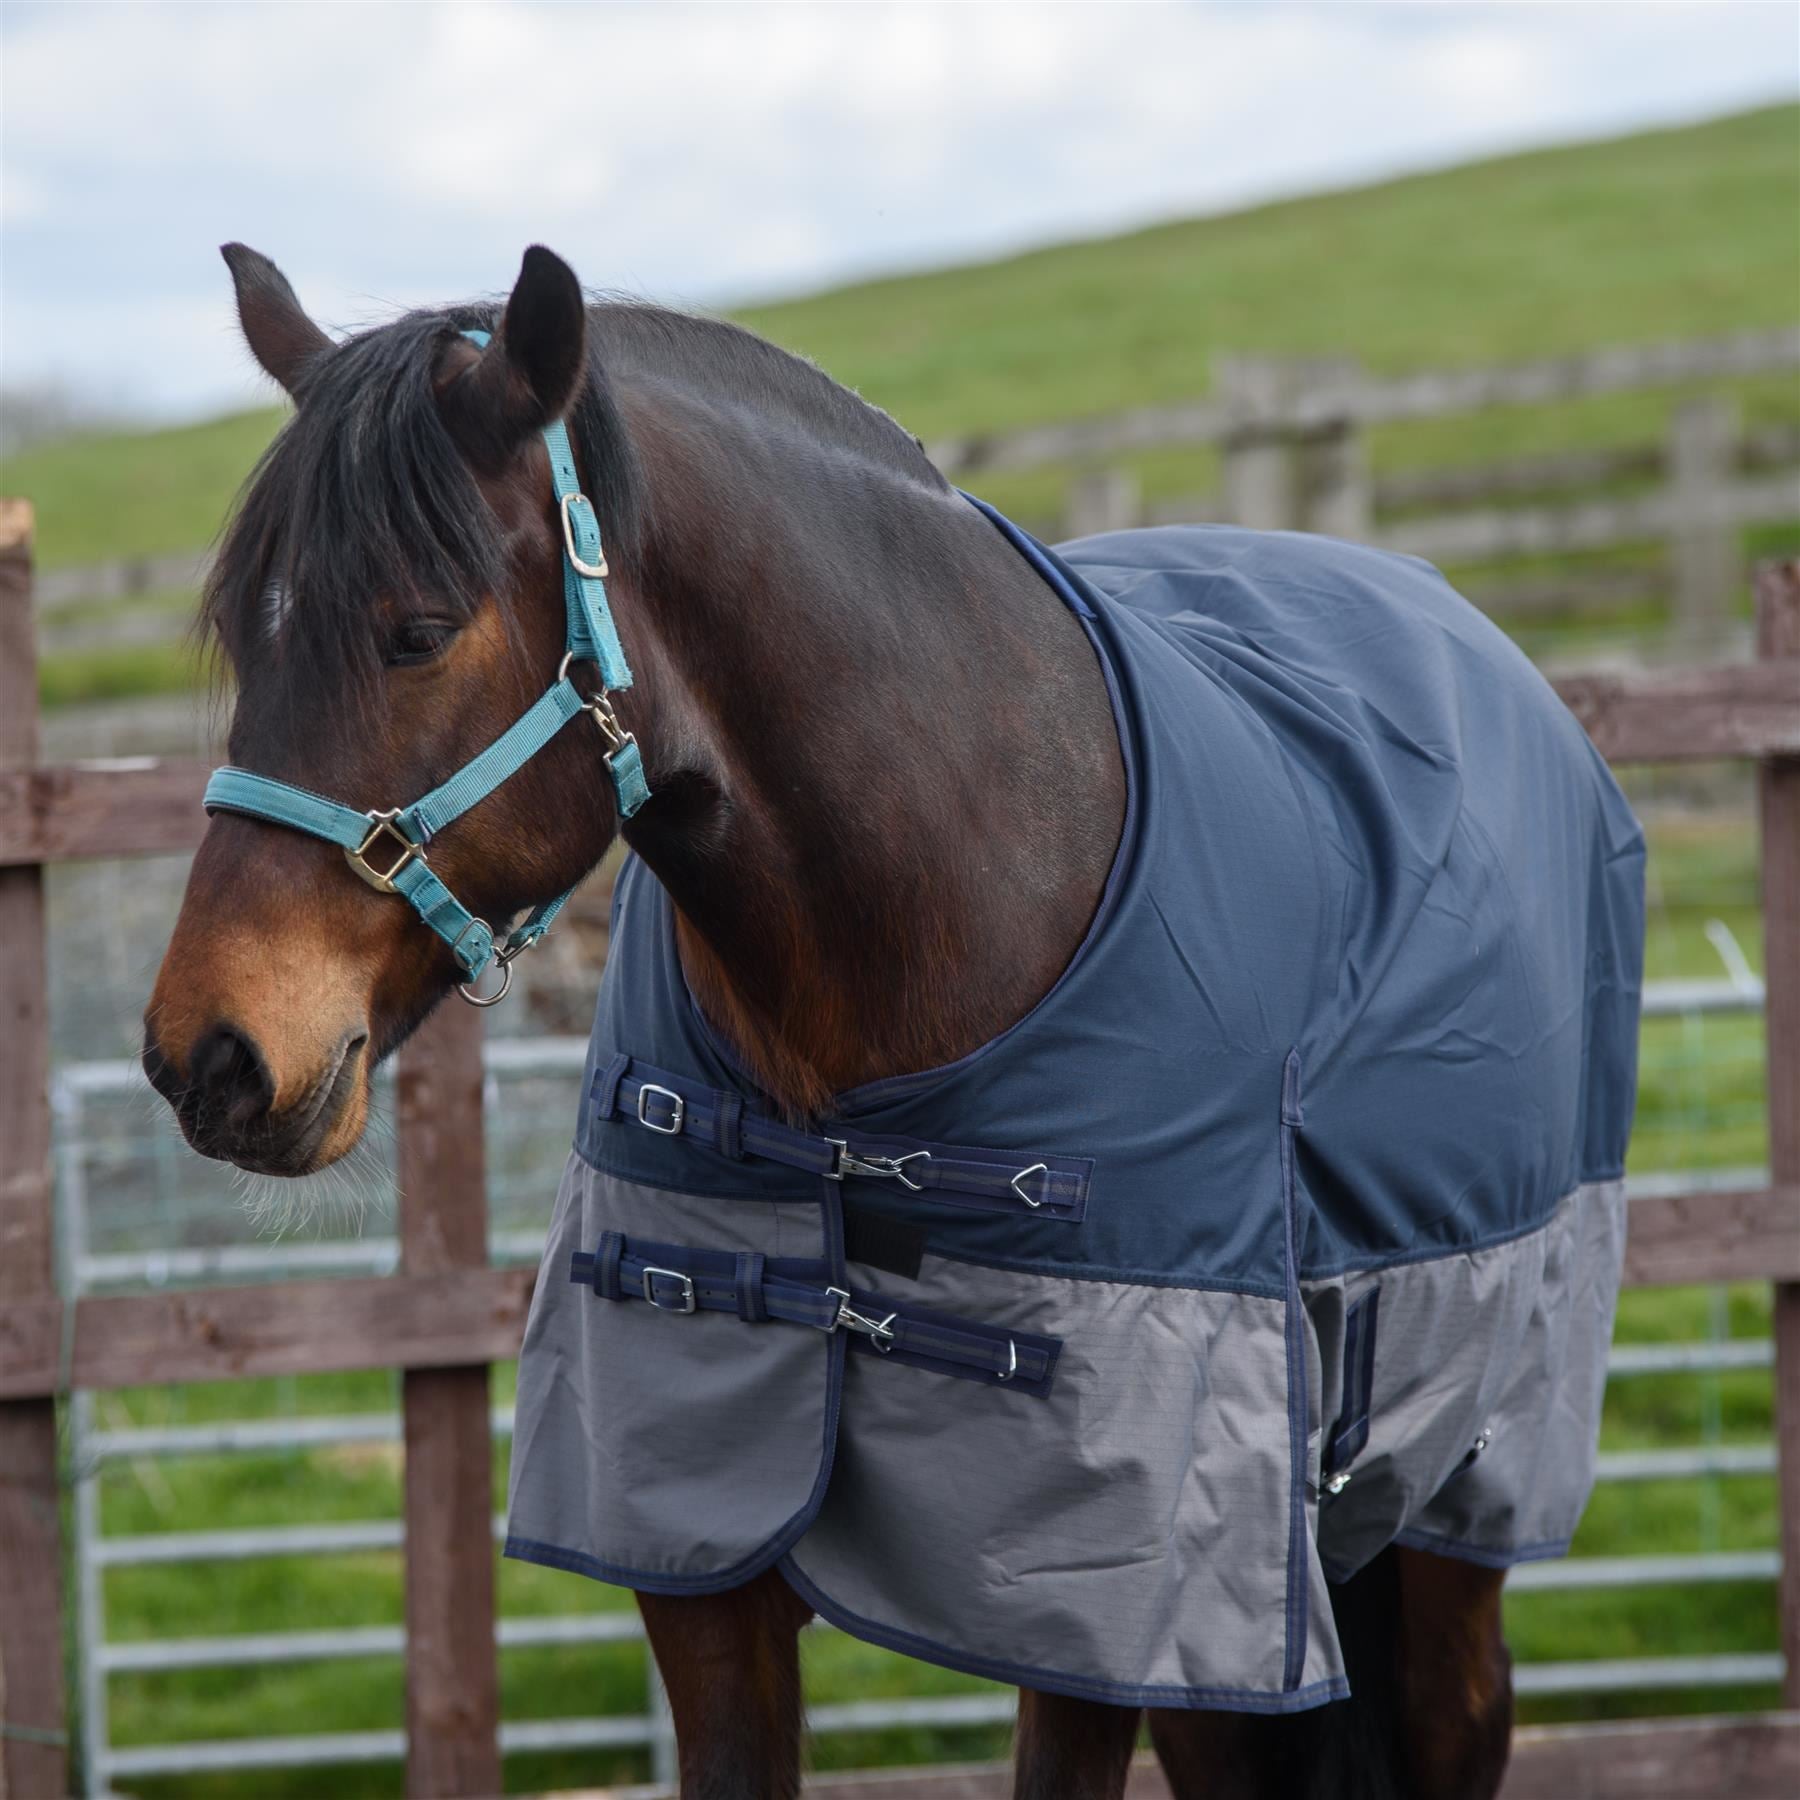 600D Outdoor Winter Turnout Horse Rugs Waterproof 50G Fill Navy/Grey 5'6-6'9 - Tack24